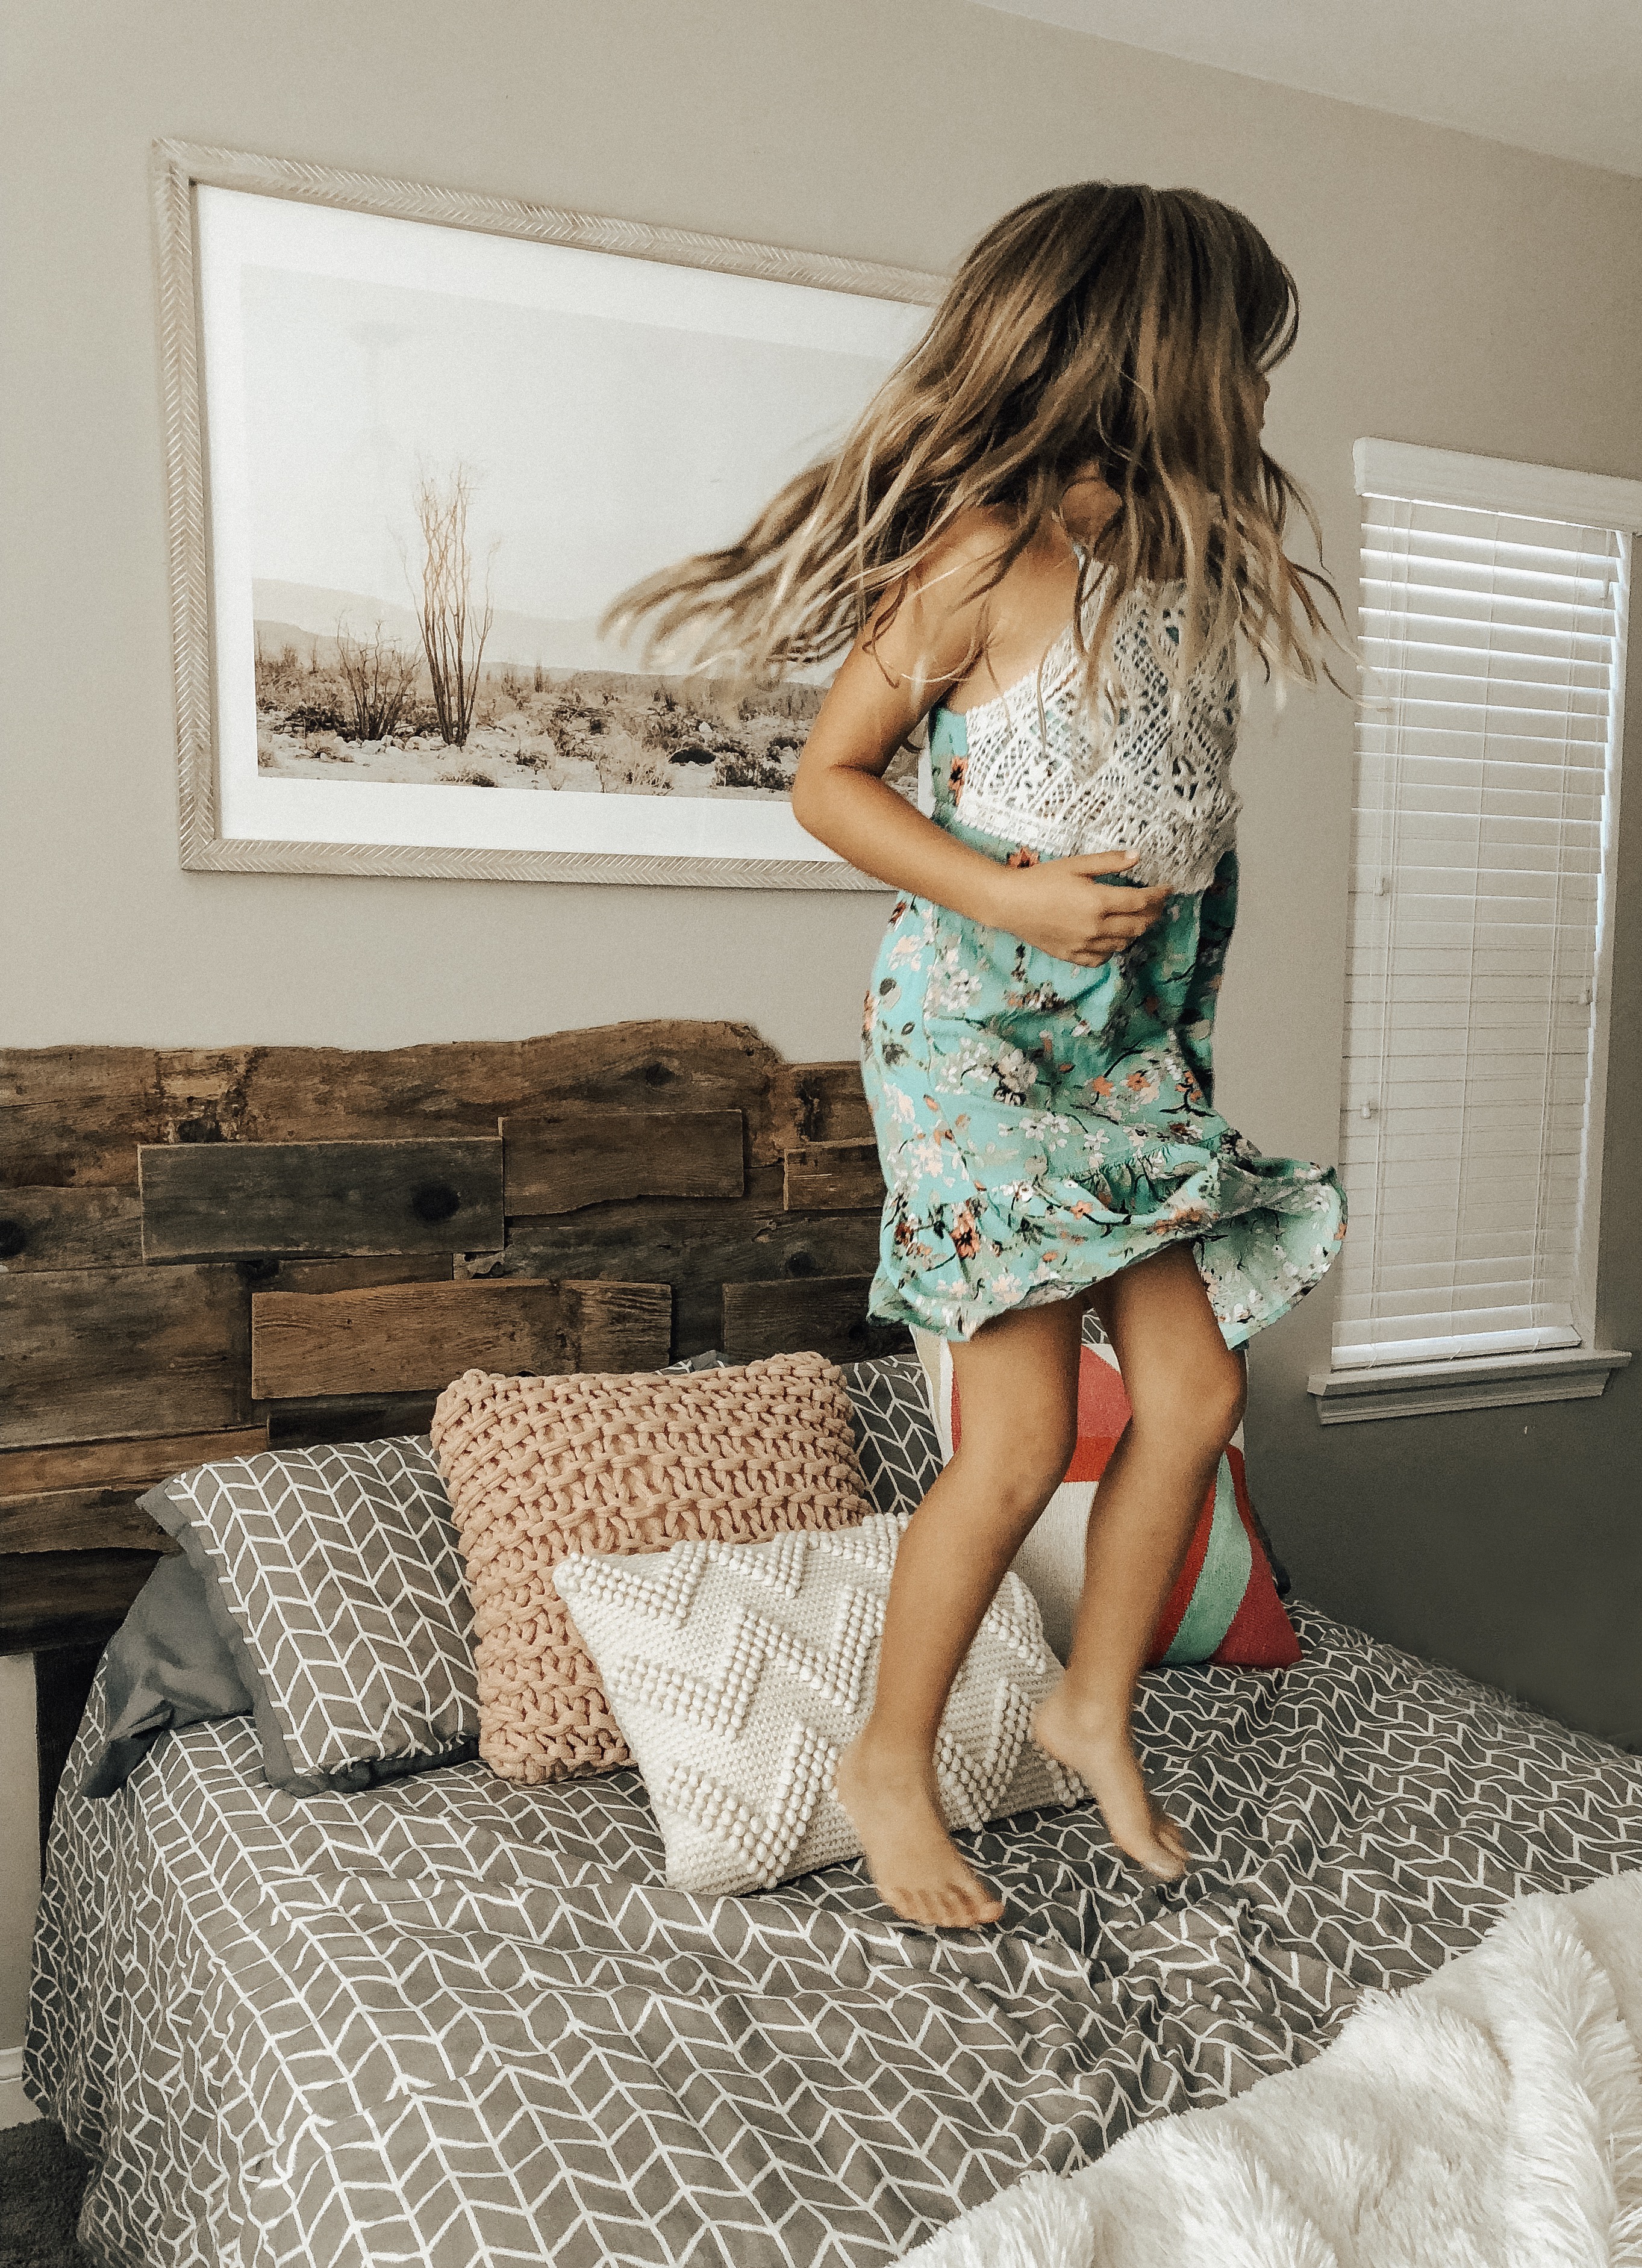 STYLING MY HOME WITH MINTED ART- Jaclyn De Leon Style + Minted art + stylng the home + home decor + wall art + home inspiration + guide to updating your art + art collector + retro style art + interior design + having fun with kids + decorating with kids + jumping on the bed